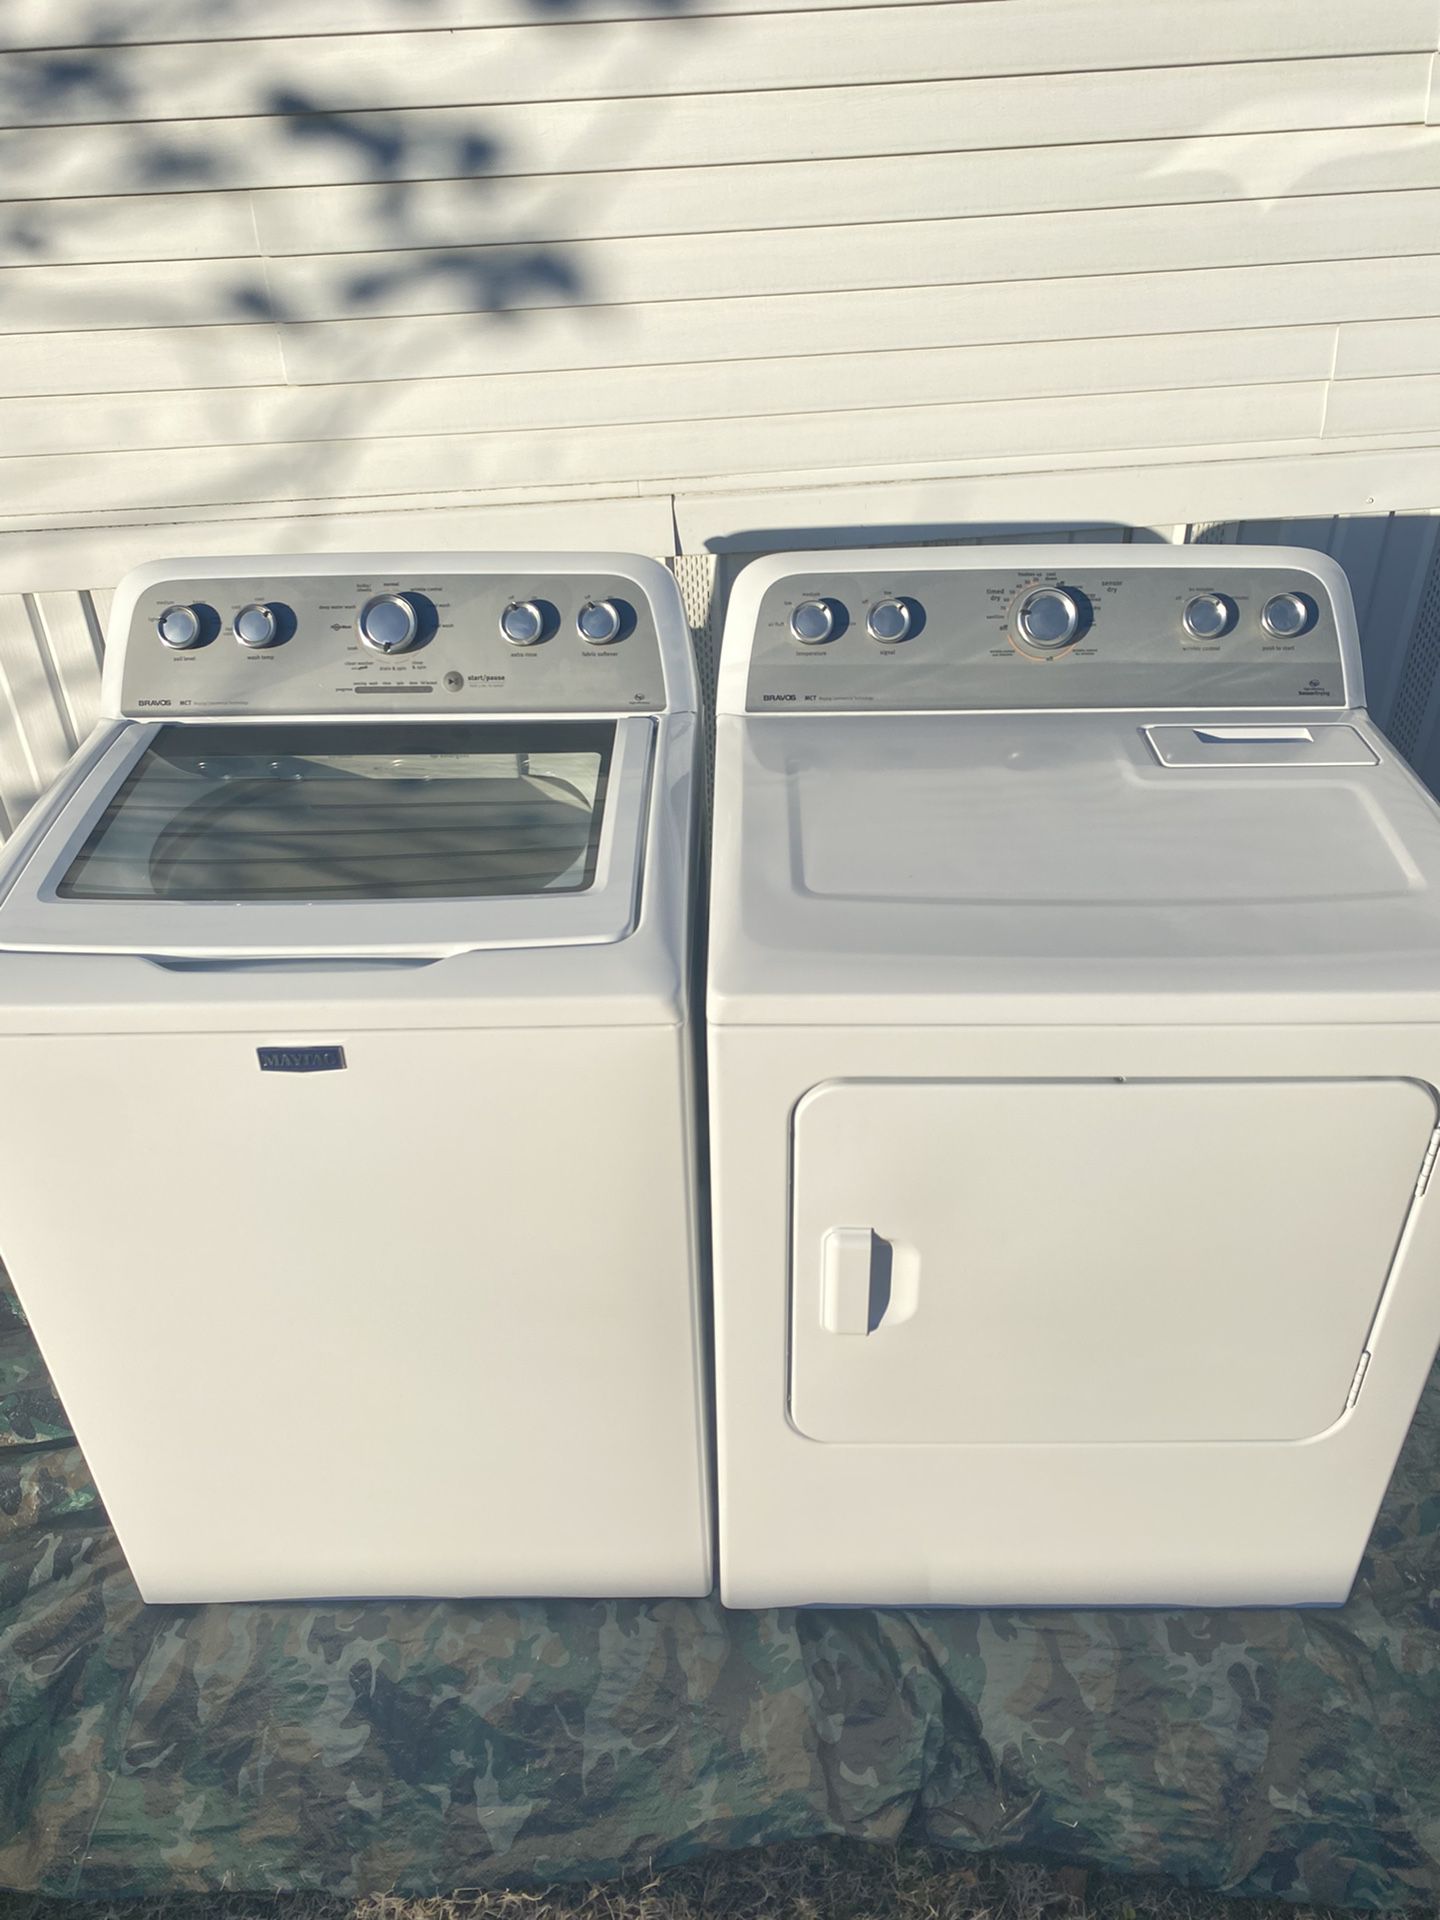 Washer and Dryer (MAYTAG)